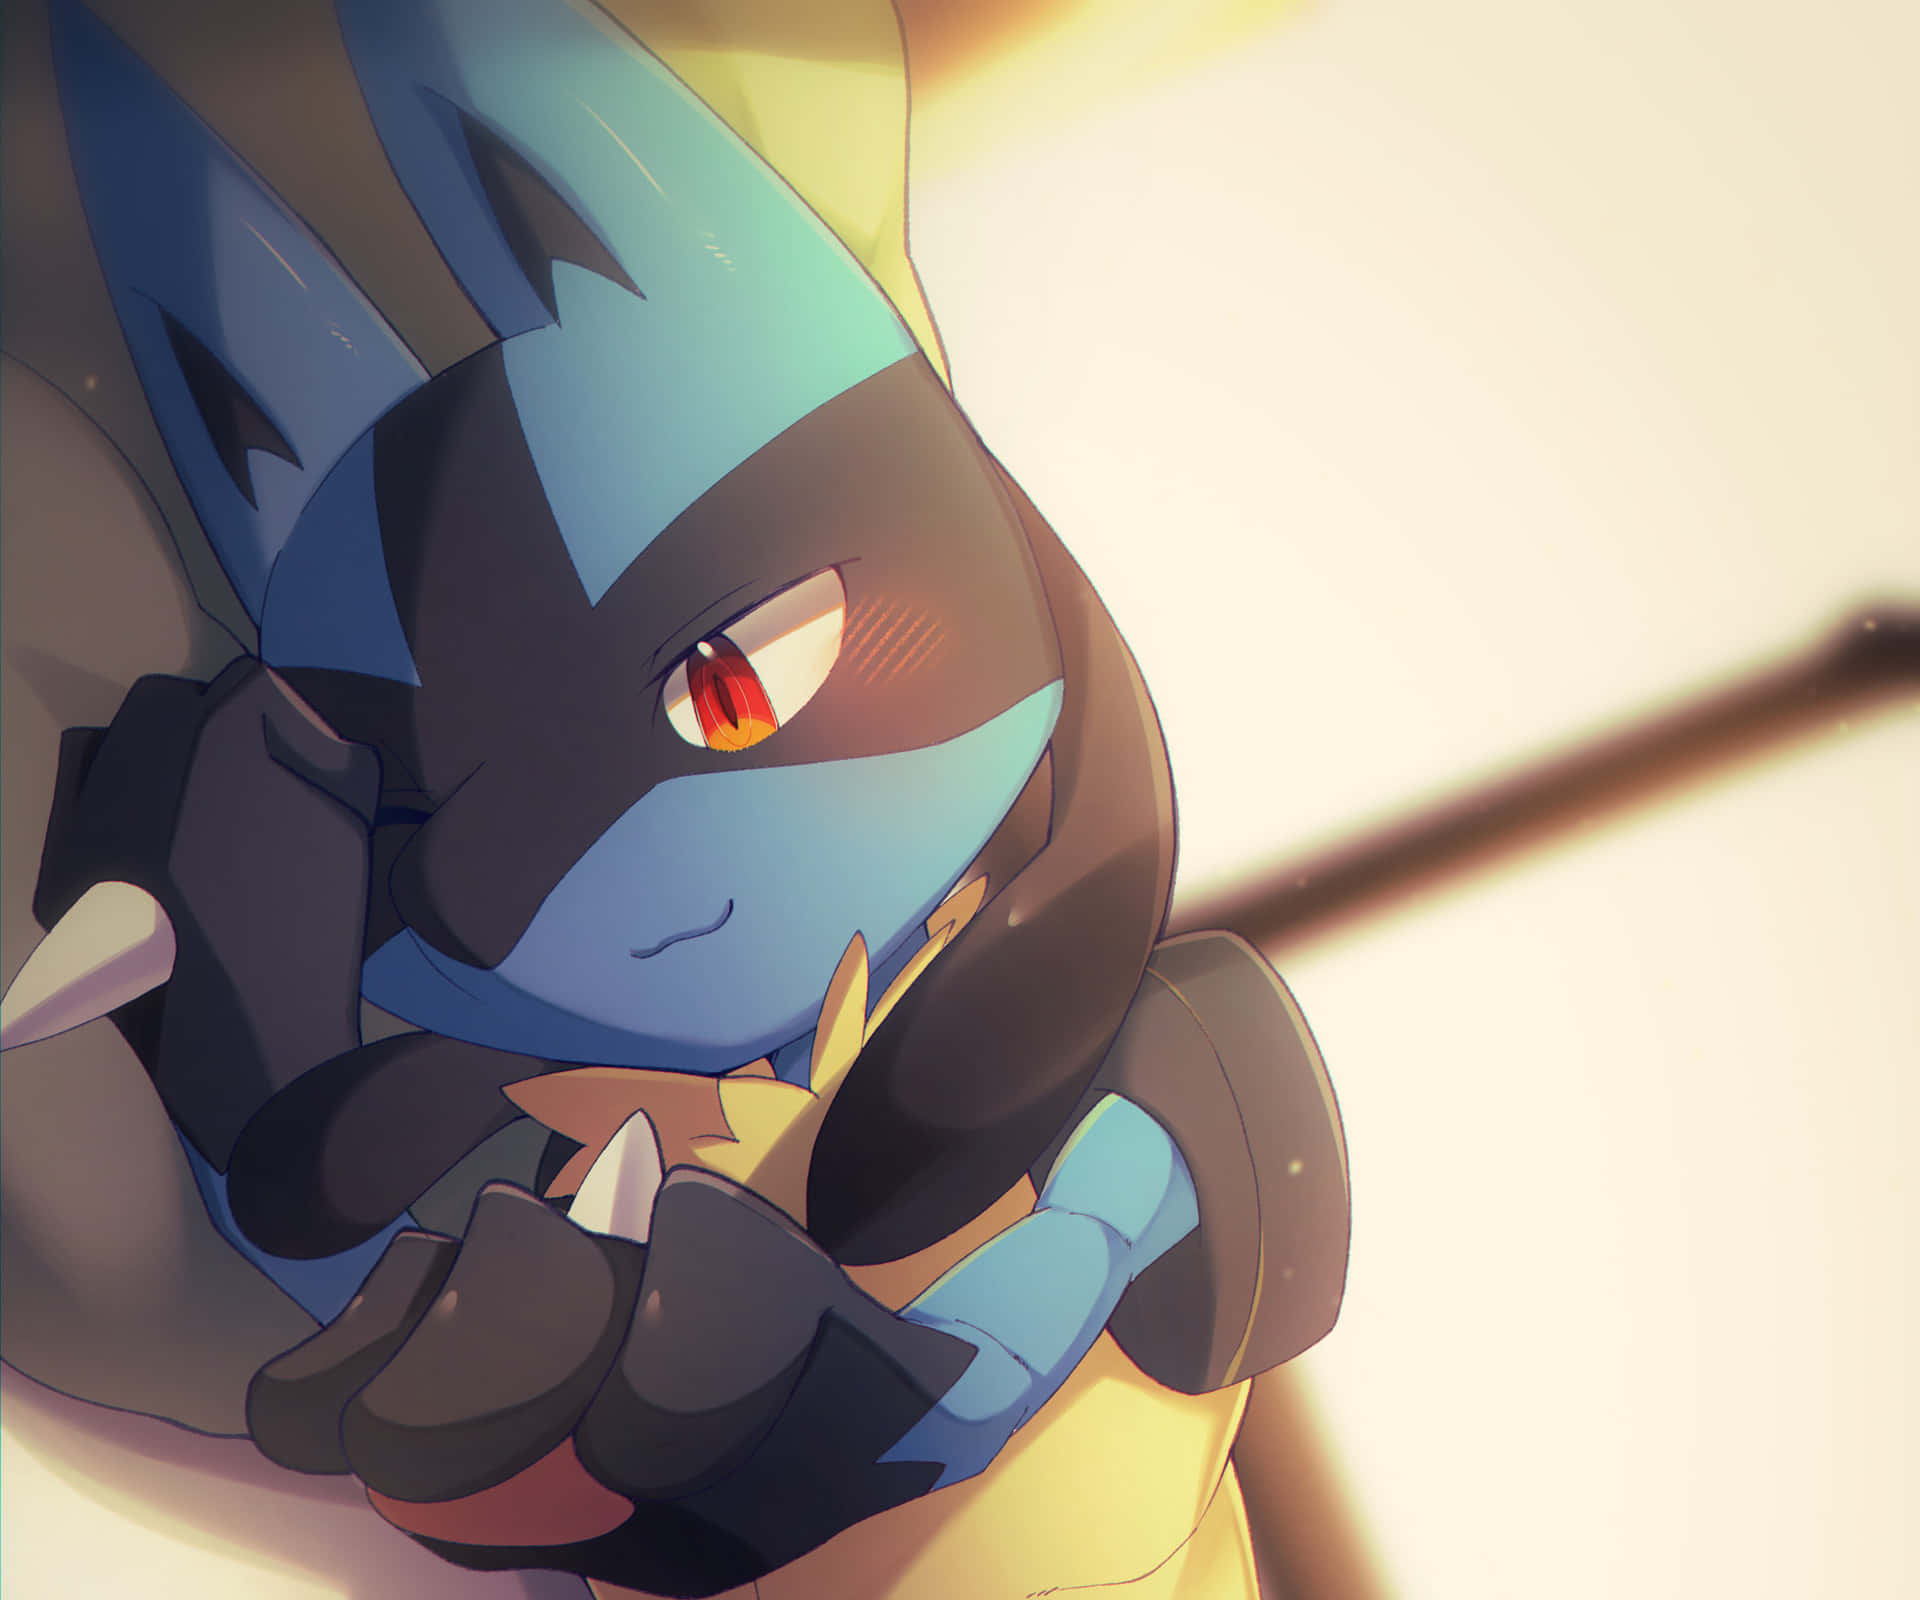 "Team Up with Lucario and Unleash its Power in Battle"